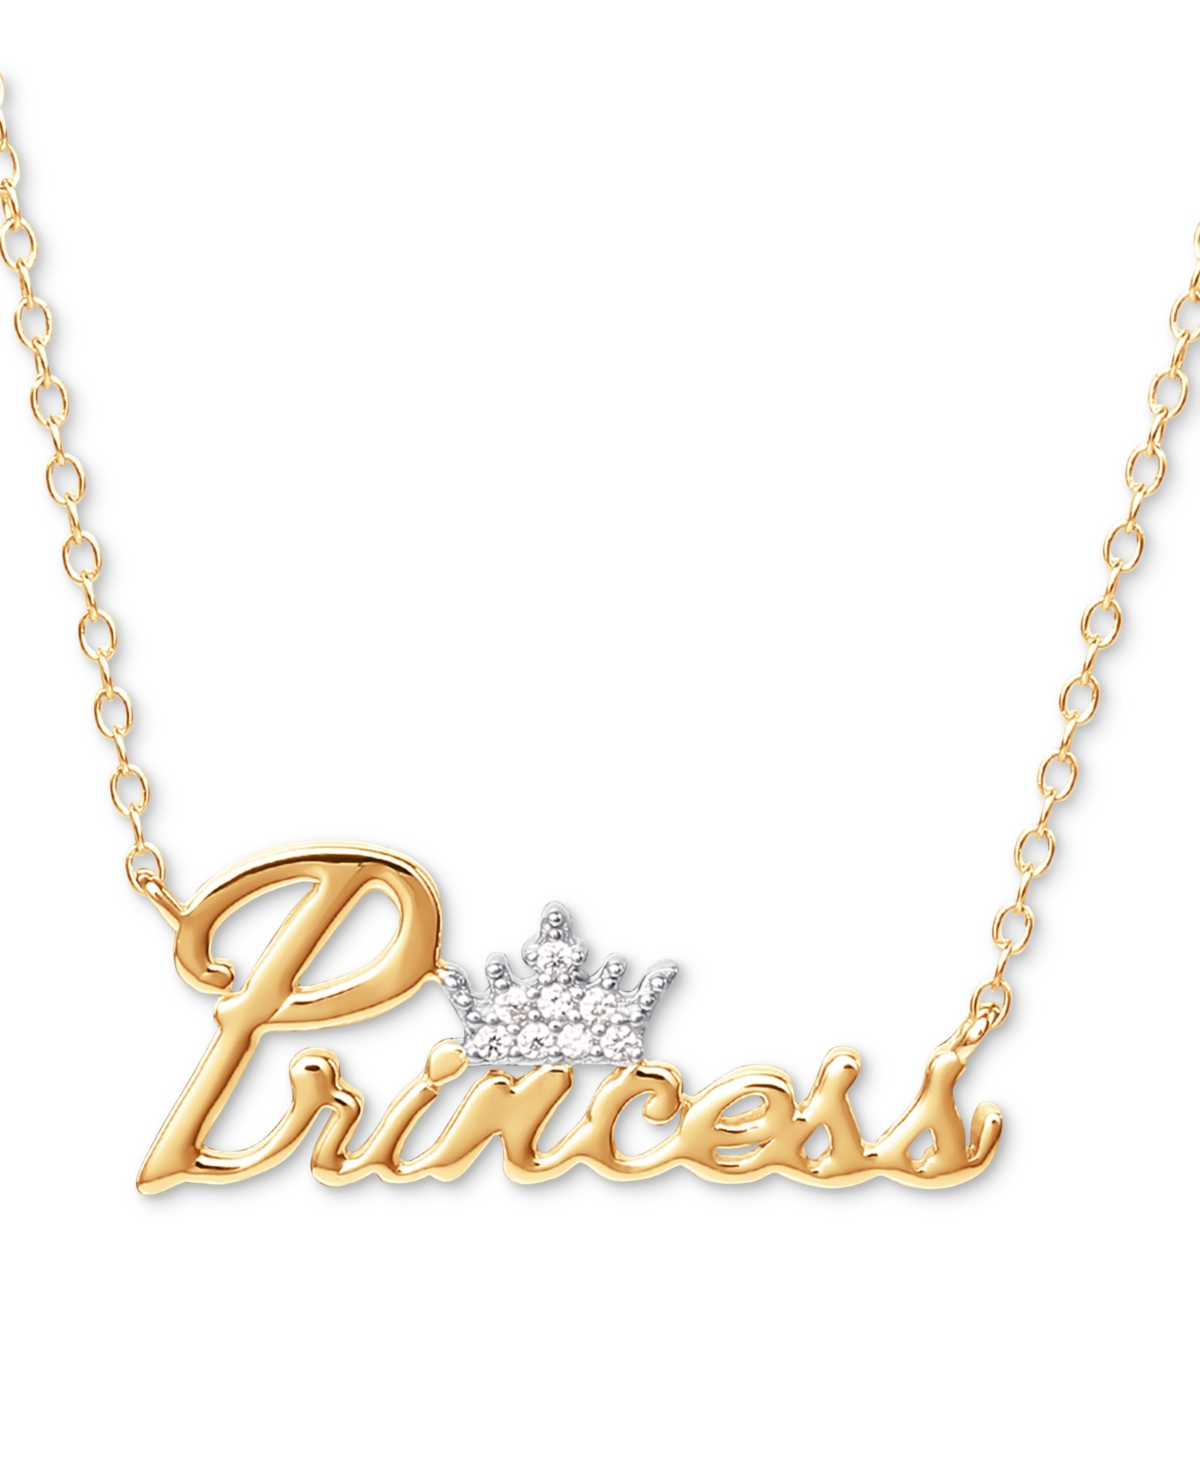 Cubic Zirconia Princess Tiara 18" Pendant Necklace in 18k Gold Over Silver - Gold Over Silver